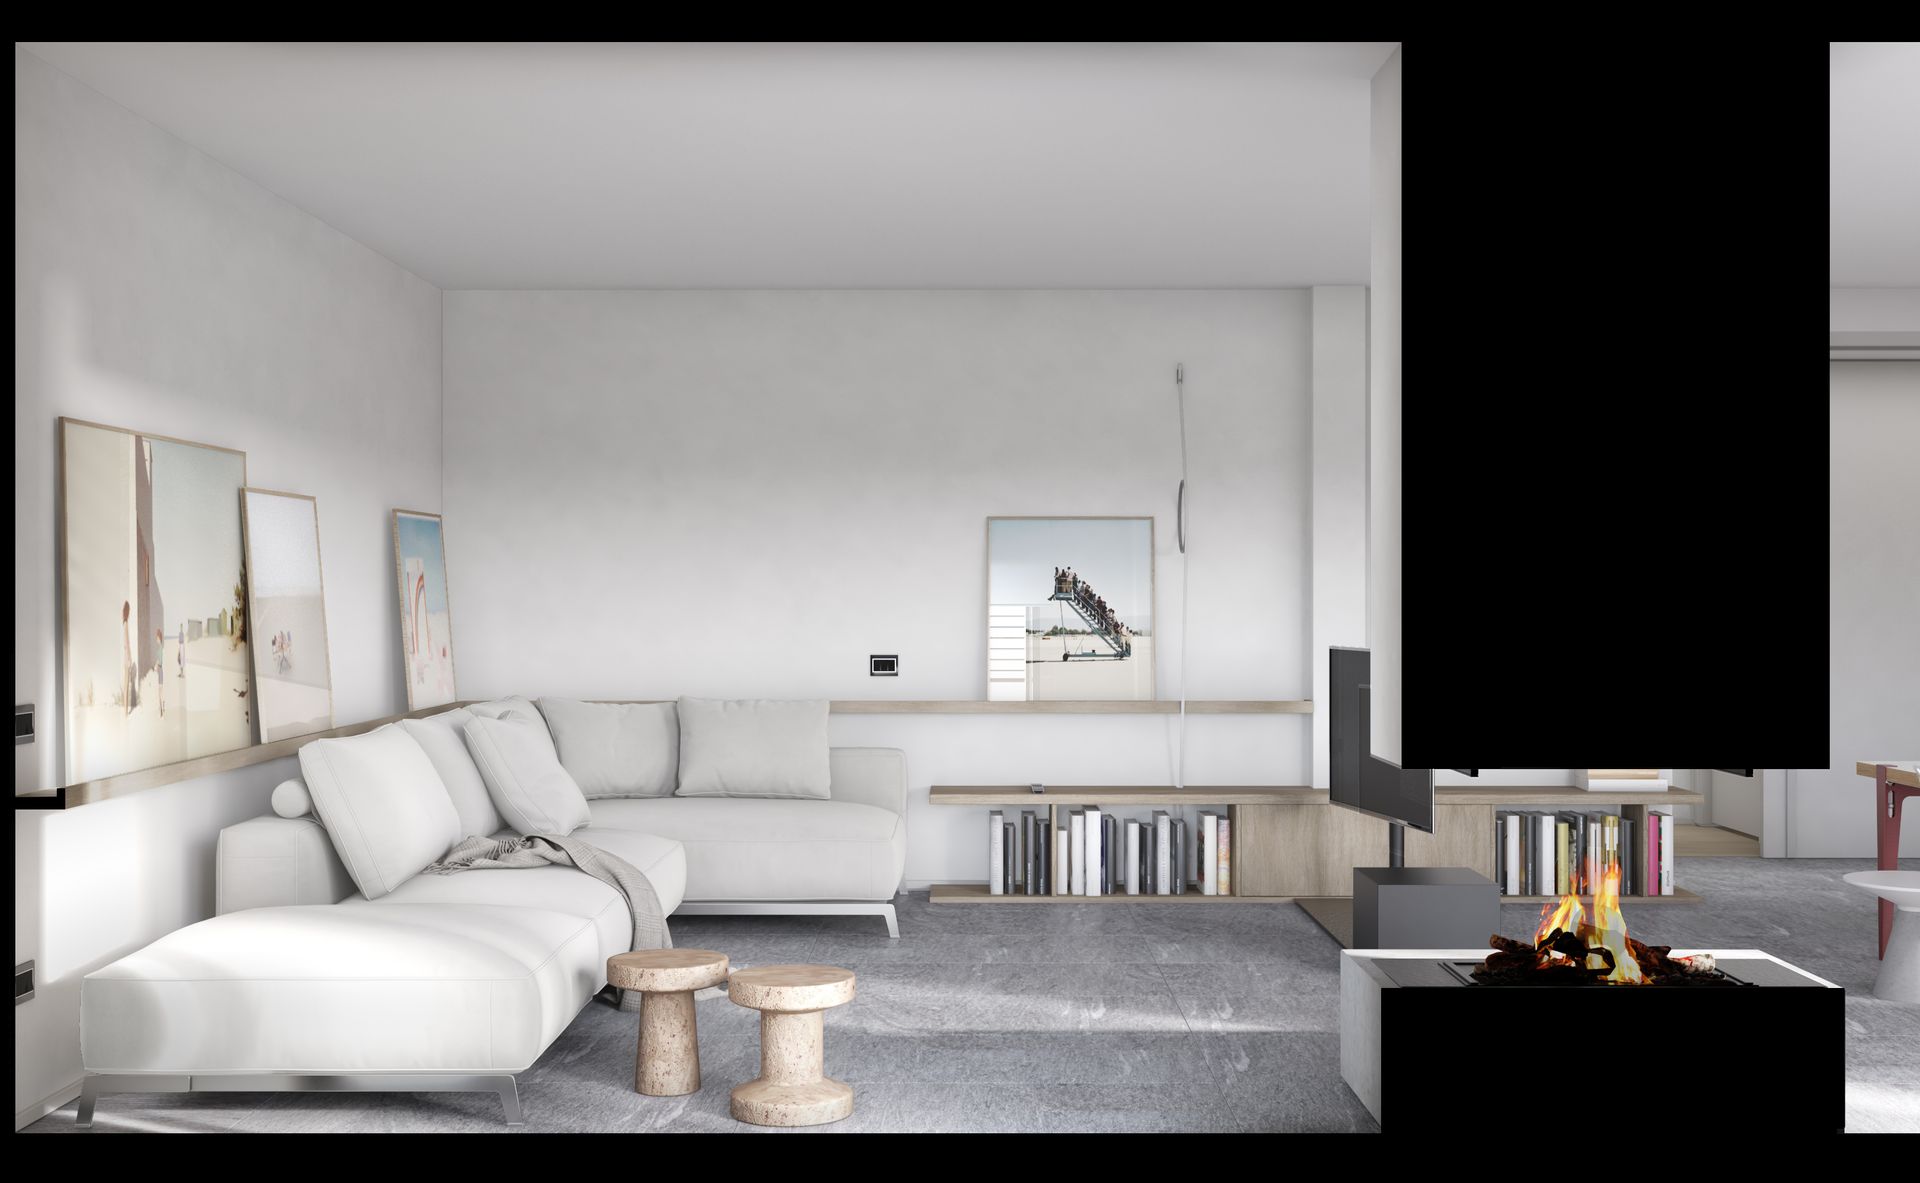 Interior design project, apartment renovation big living room, central column with paneling, large terrace. Officina Magisafi architecture design - living room